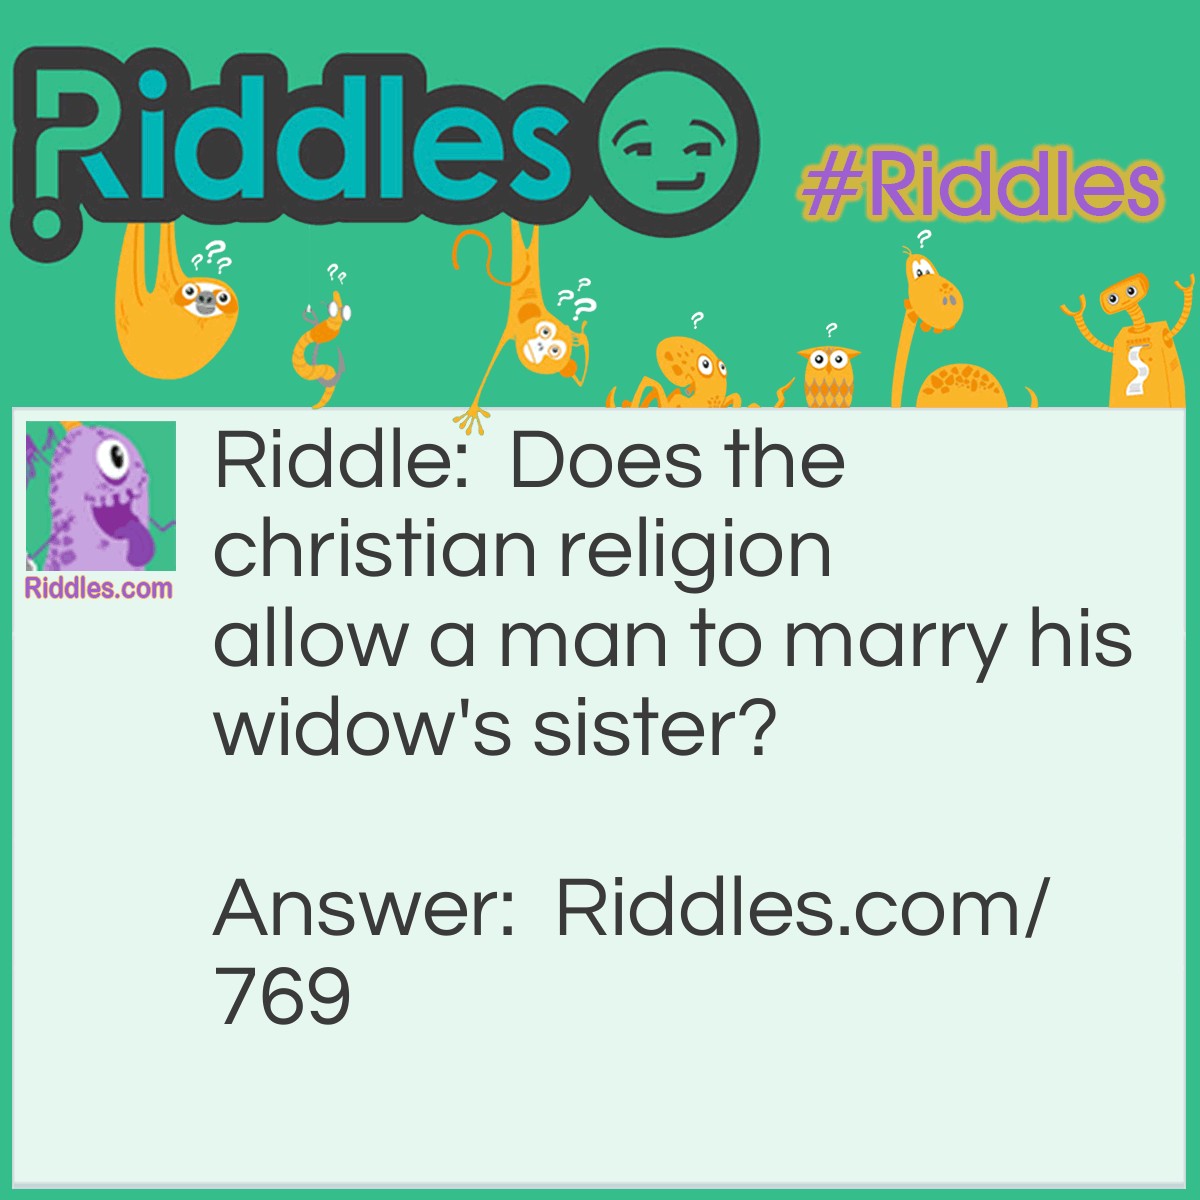 Riddle: Does the Christian religion allow a man to marry his widow's sister? Answer: A dead man cannot marry. His widow would mean he is dead.